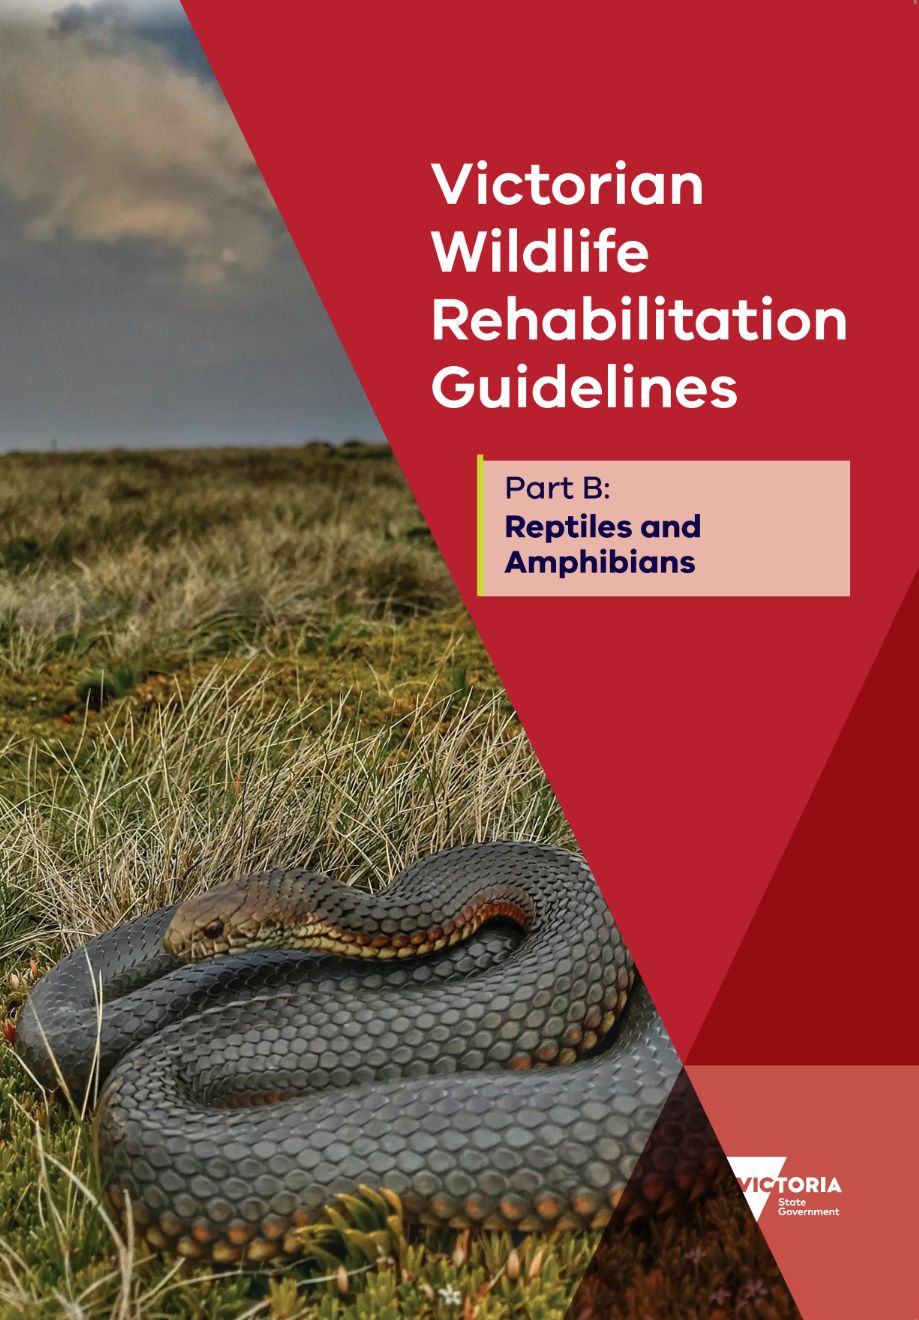 snake on the cover of Victorian Wildlife Rehabilitation Guidelines 